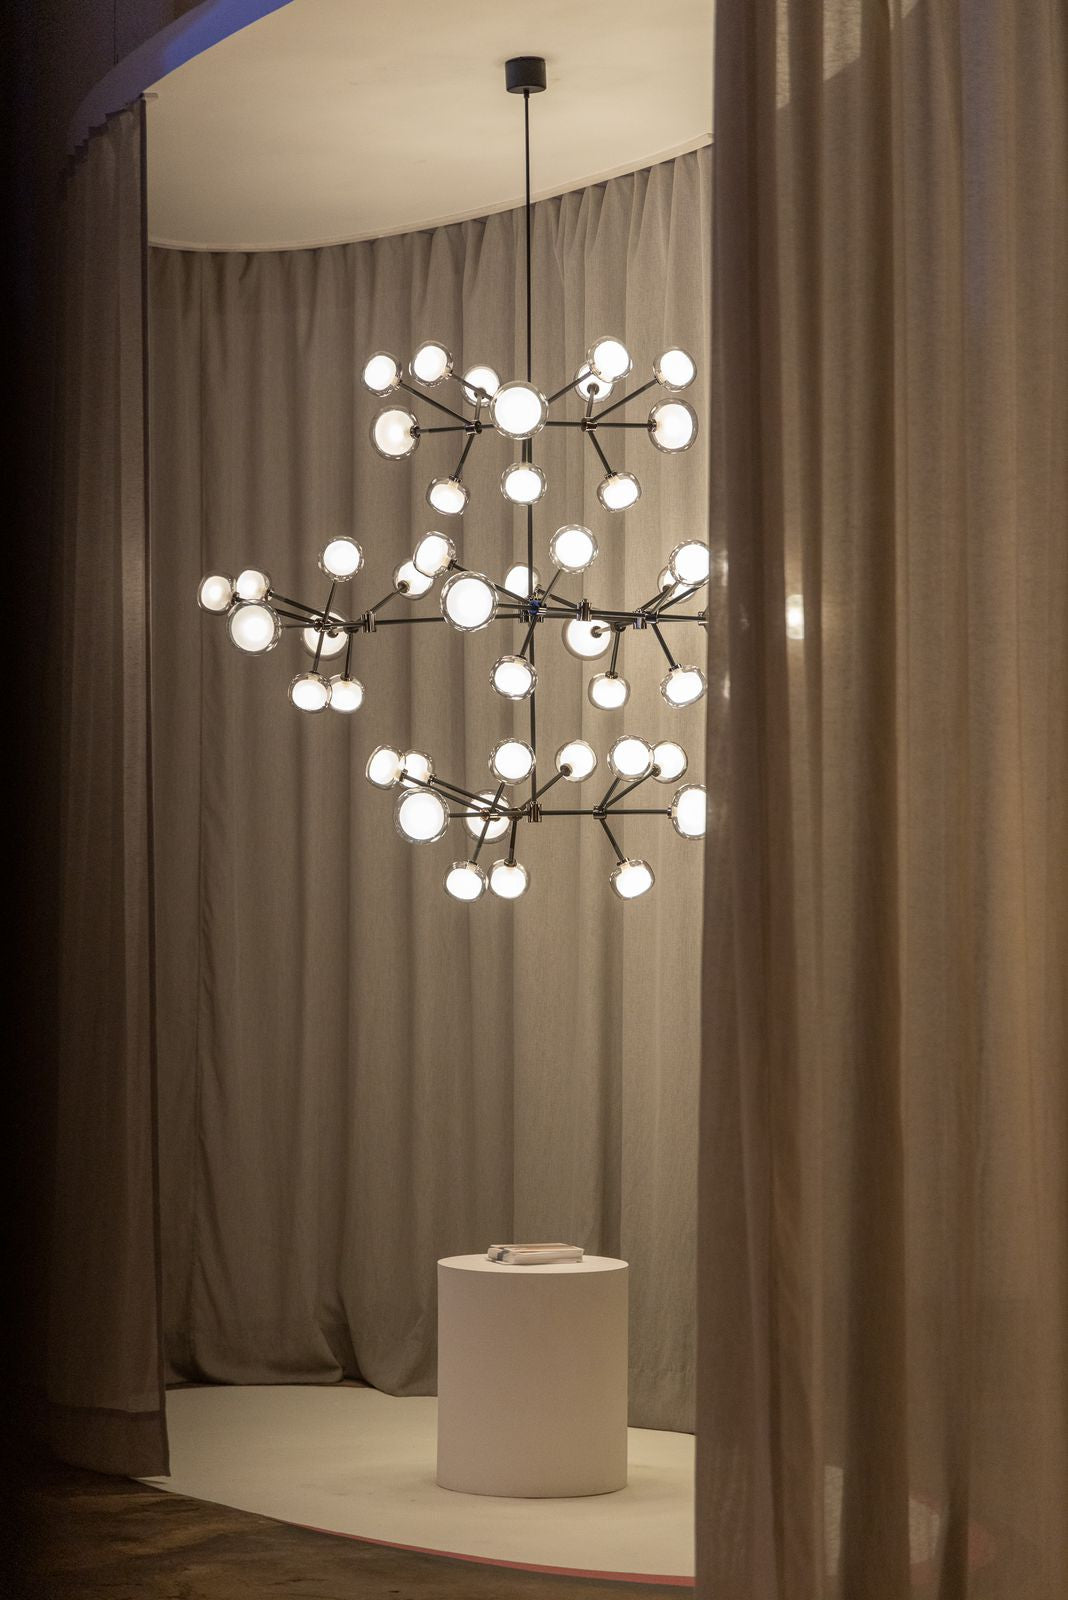 NABILA CHANDELIER 552.48 BY TOOY from $13,820.00